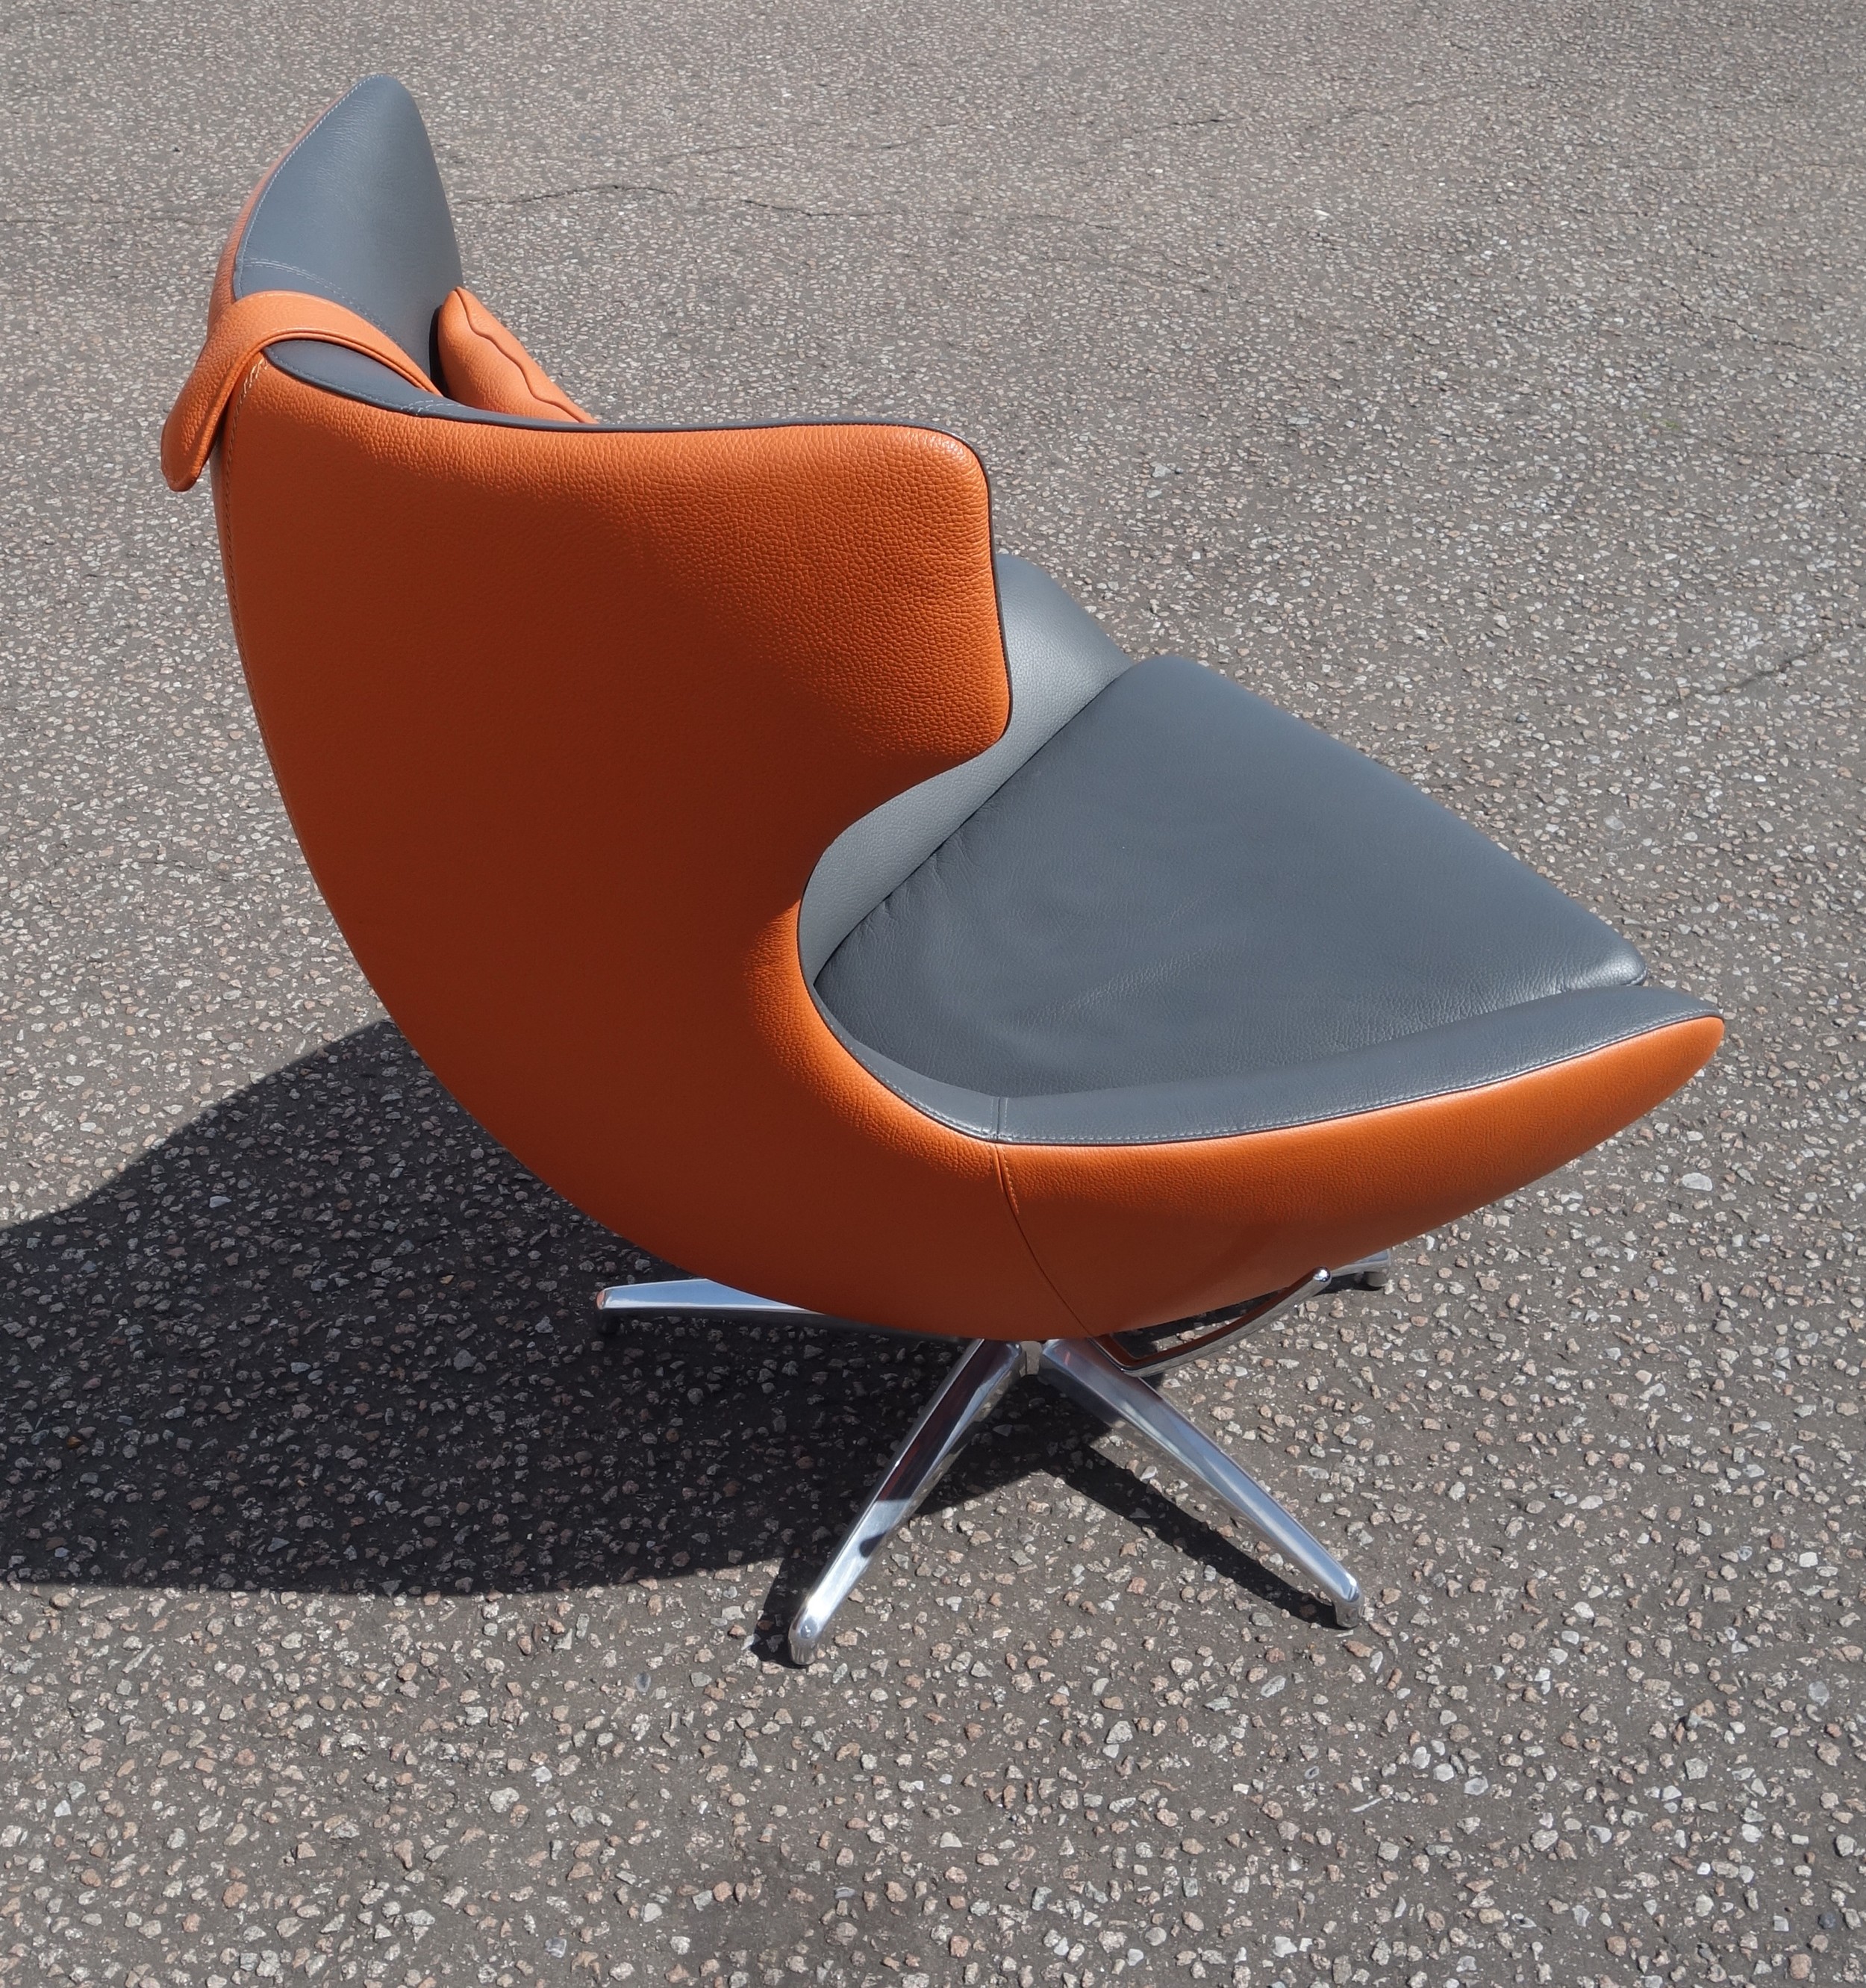 Leolux Caruzzo swivel armchair, designed by Hans Schrofer, launched 2015, custom made with orange - Image 2 of 6